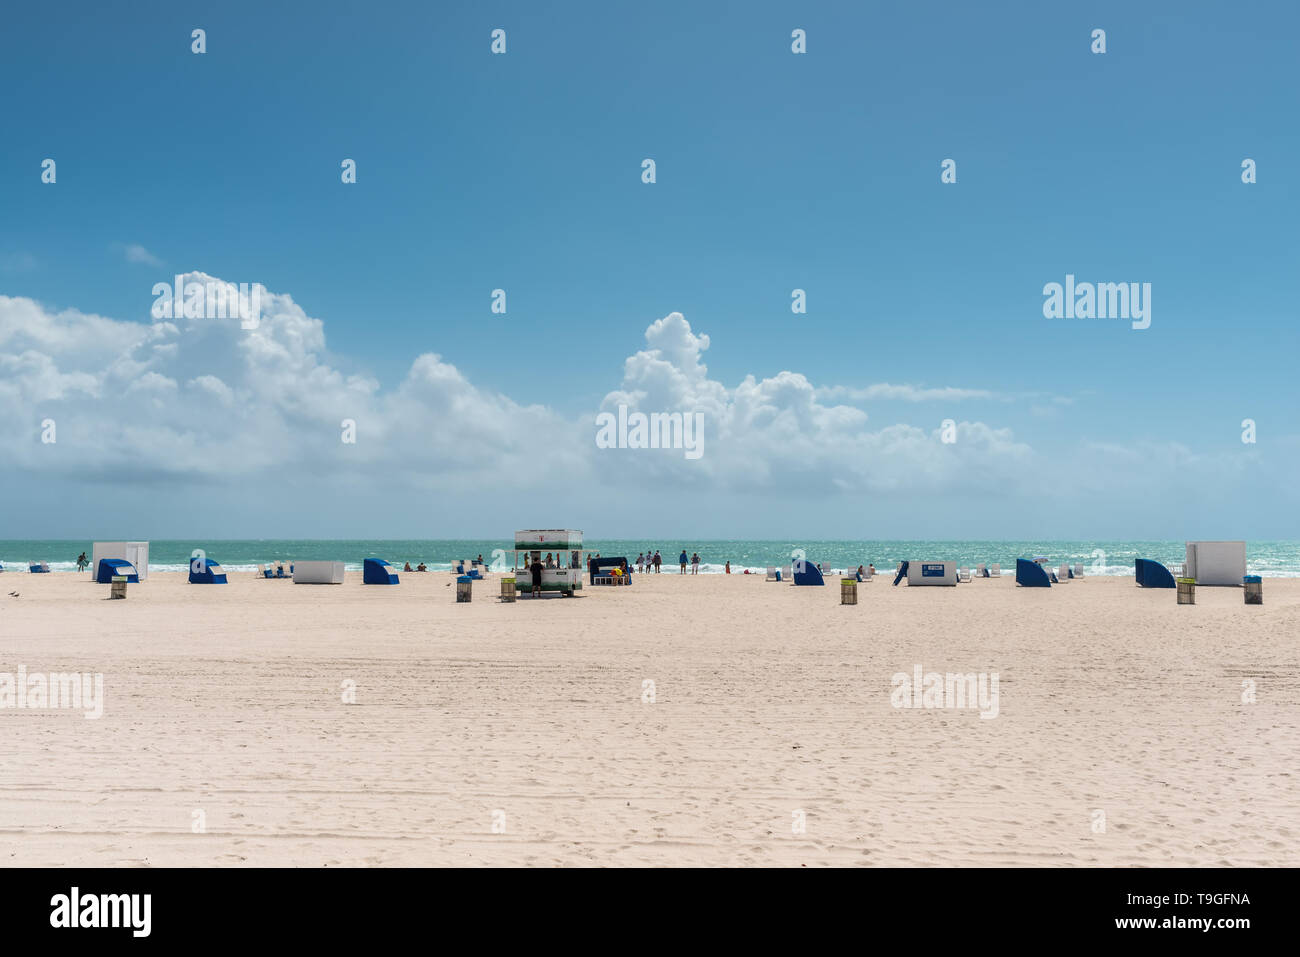 Miami, FL, USA - April 19, 2019: World famous travel location - South beach scene in Miami, Florida, United States of America, situated just across th Stock Photo